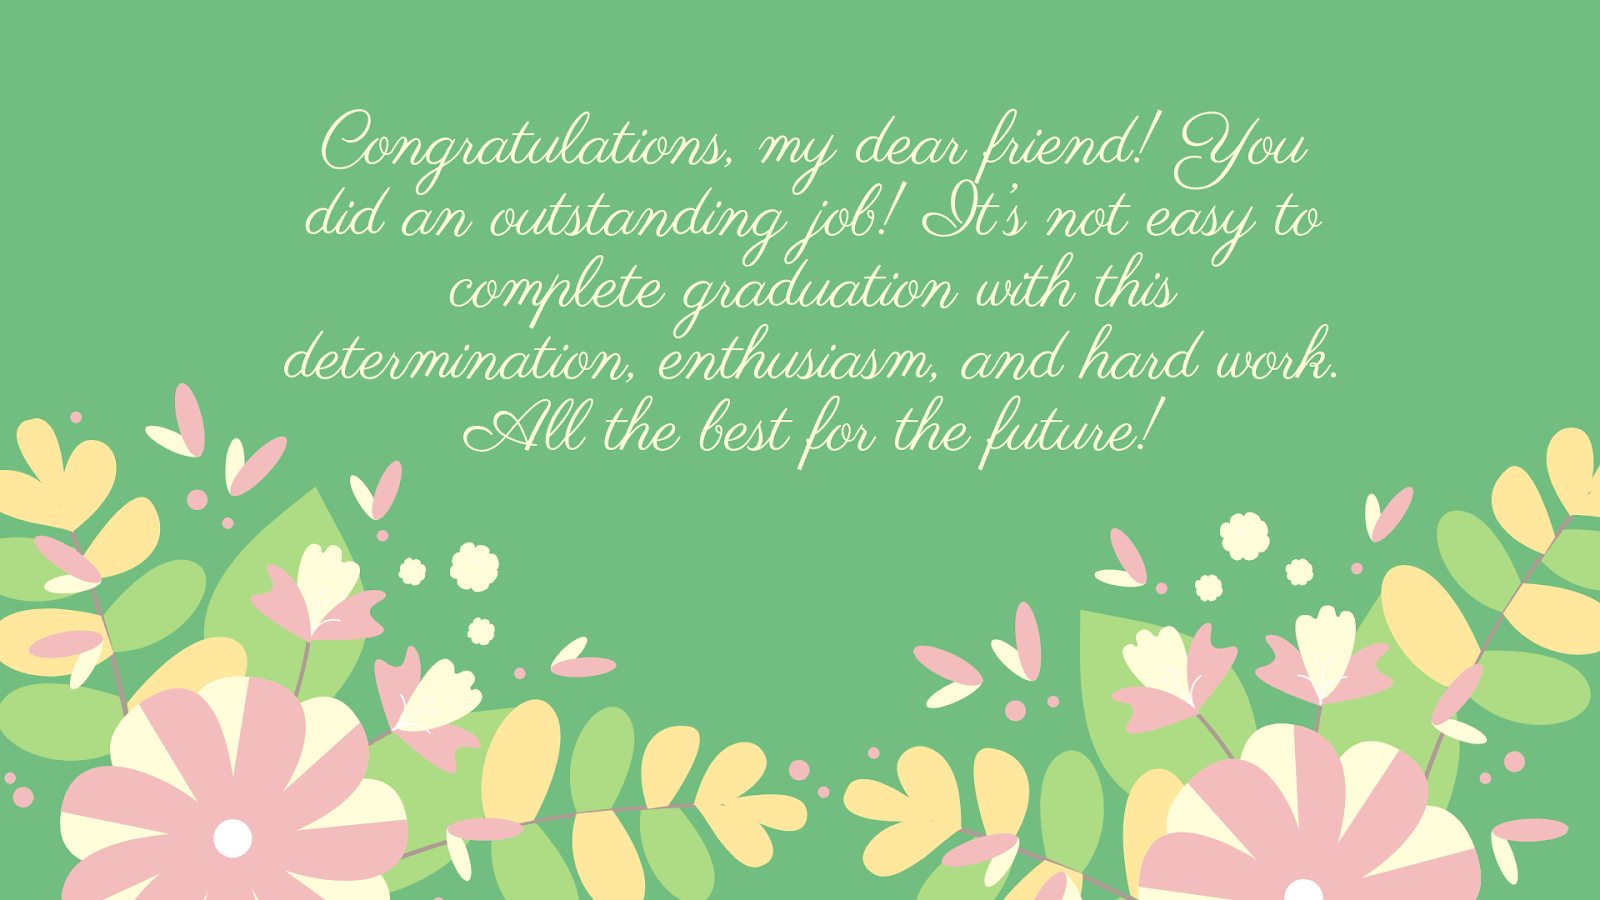 Funny Graduation Quotes for Friends: Messages and Wishes | Badhaai.com